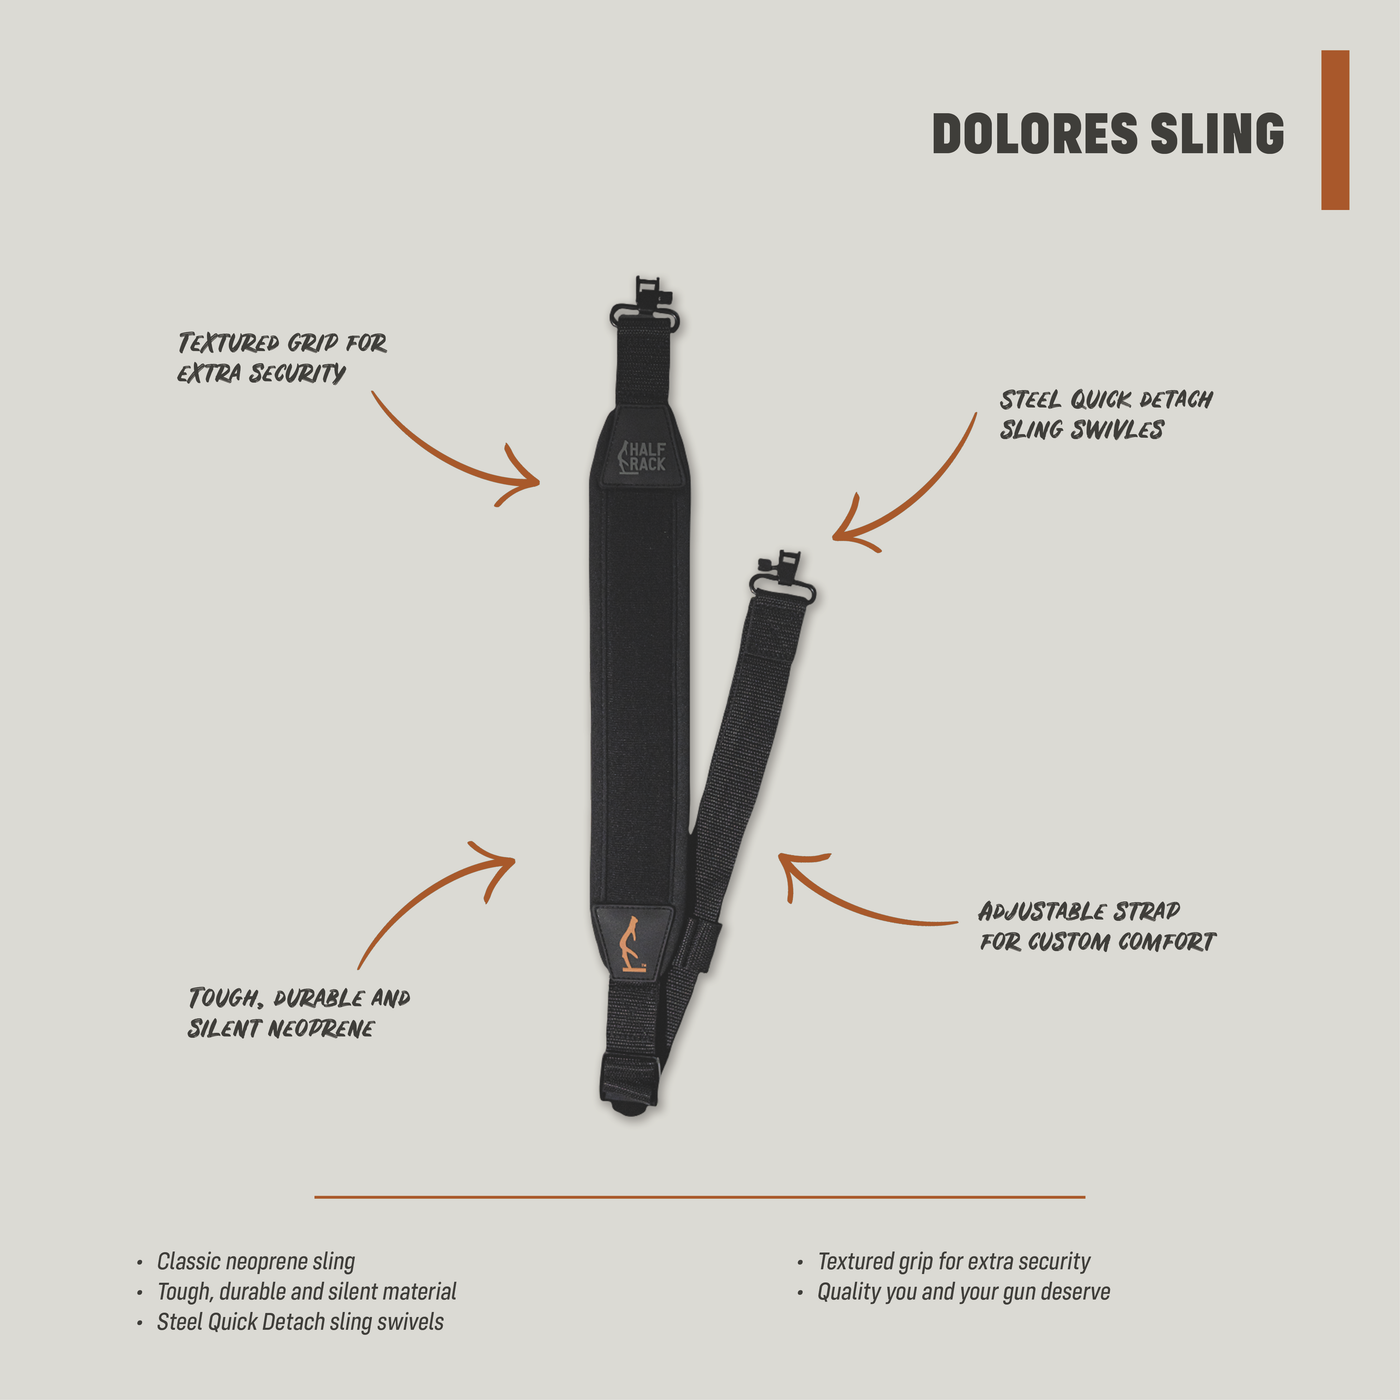 Dolores Sling